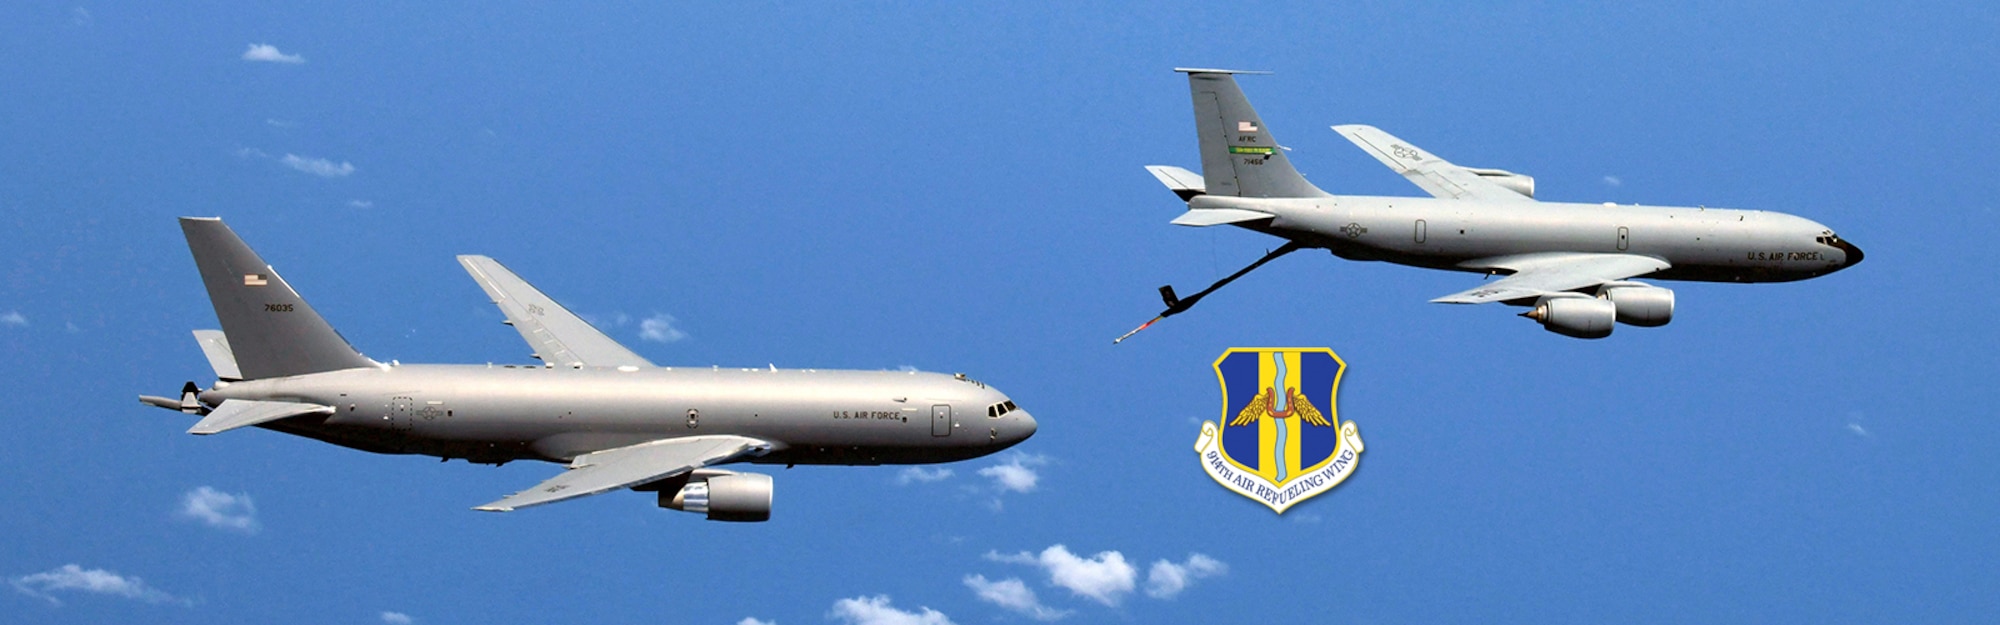 Aircrews from the 77th Air Refueling Squadron out of the 916th Air Refueling Wing flies two KC-135 Stratotankers to rendezvous with a KC-46A Pegasus from the 22 ARW operating out of Pease Air Force Base, Portsmouth, New Hampshire, Aug. 4, 2019. The 916 ARW is in airframe transition to the KC-46. (U.S. Air Force photo by Staff Sgt. Mary McKnight)